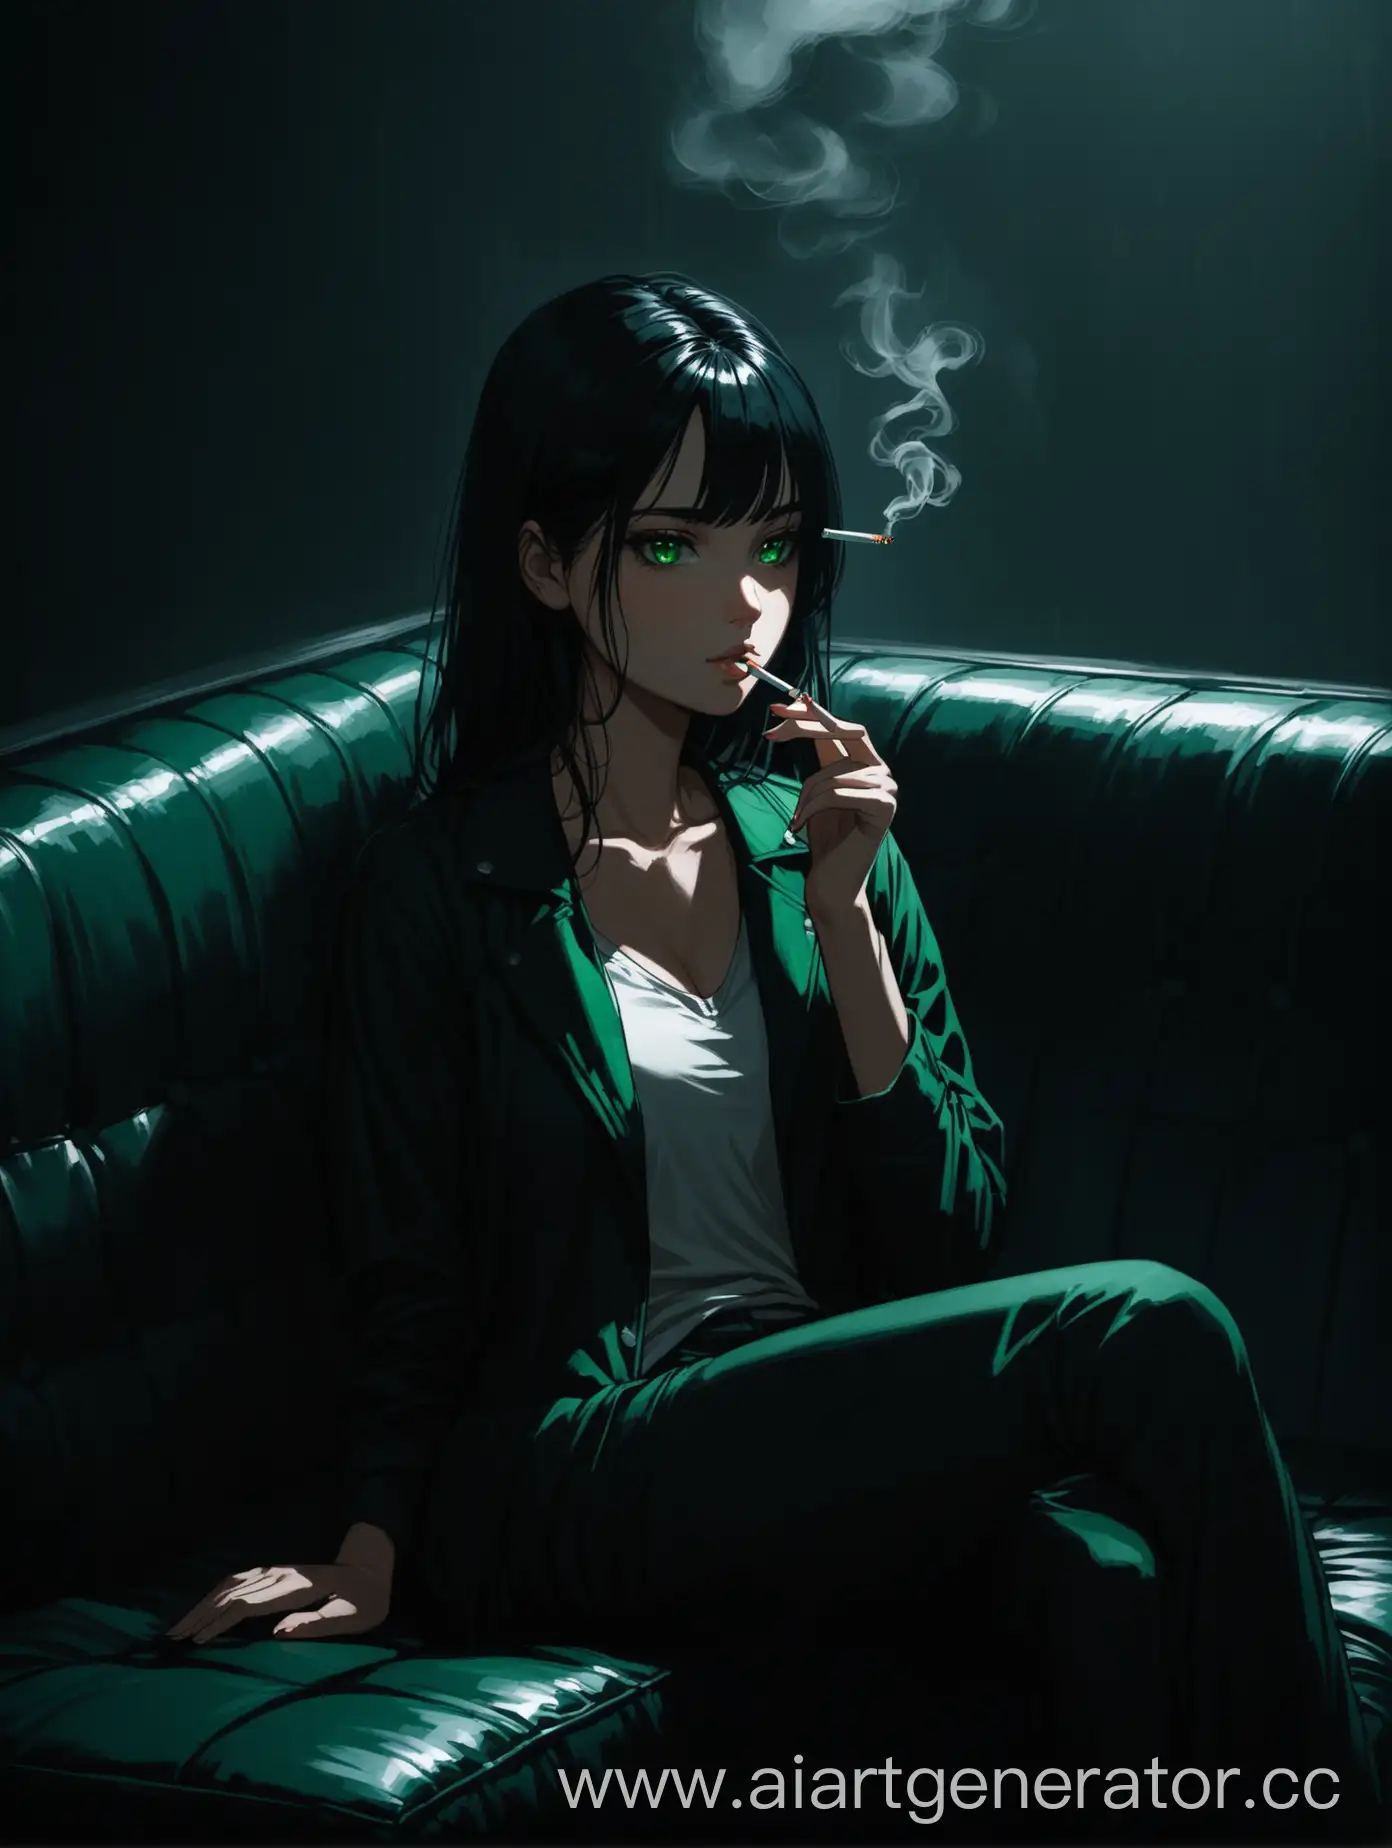 A girl with black hair and green eyes is sitting relaxed on the couch and smoking a cigarette. Gloomy atmosphere, dark room

